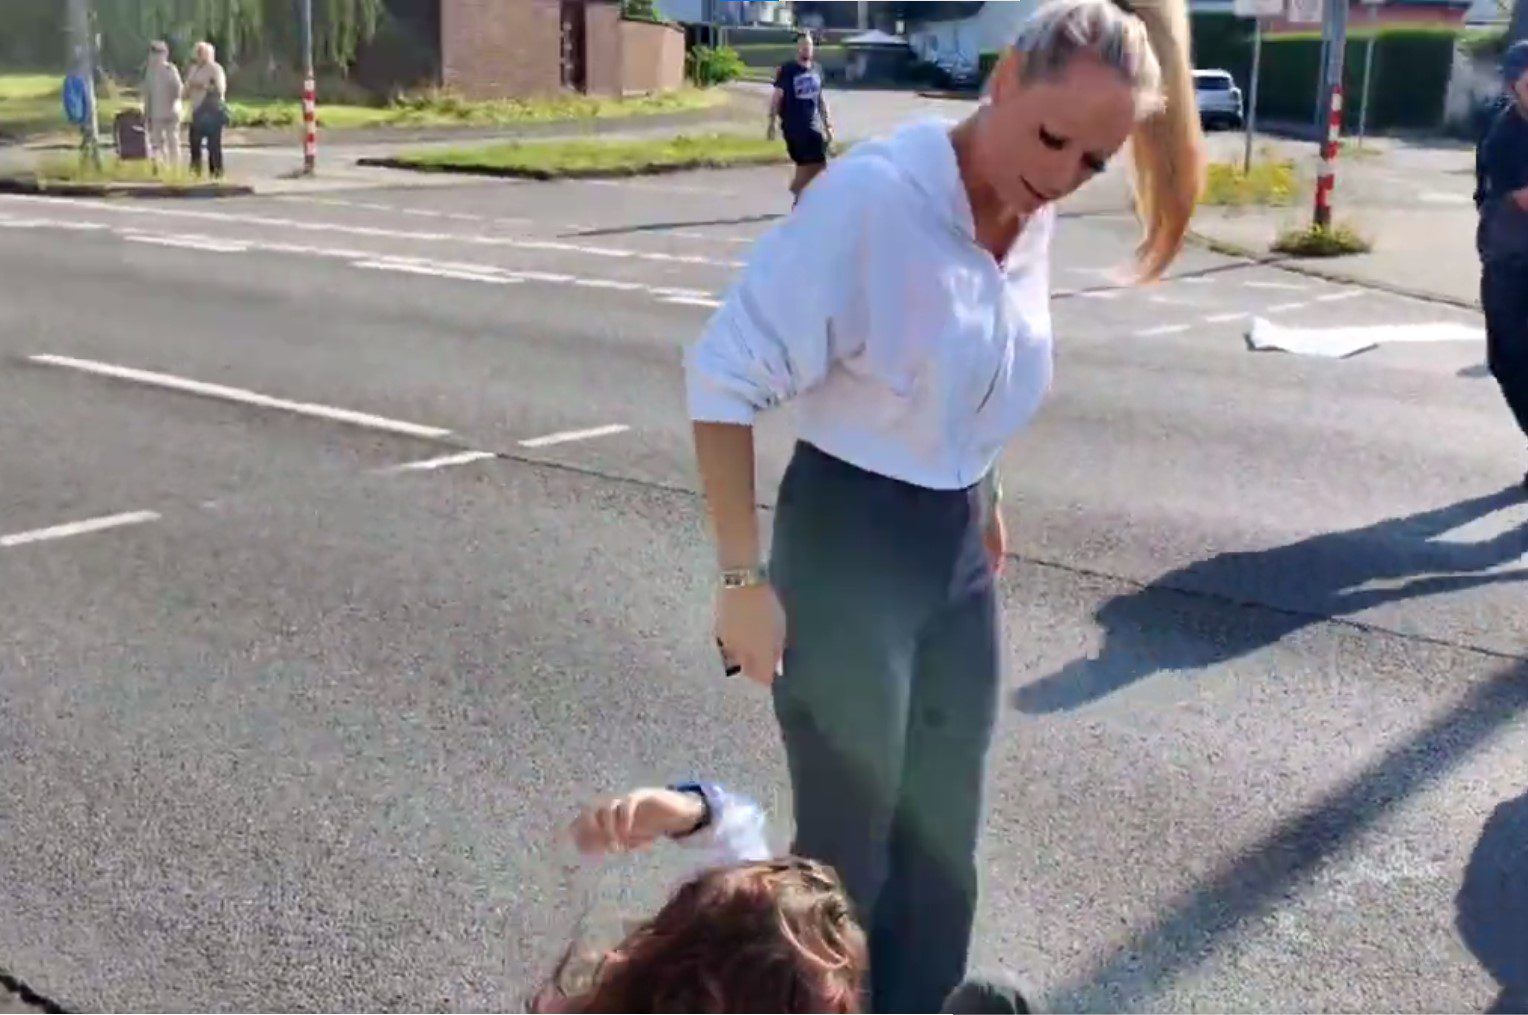 Move Over 'TMFINR' Lady, Blonde Bombshell Drags Activist Out of the Street! | WLT Report